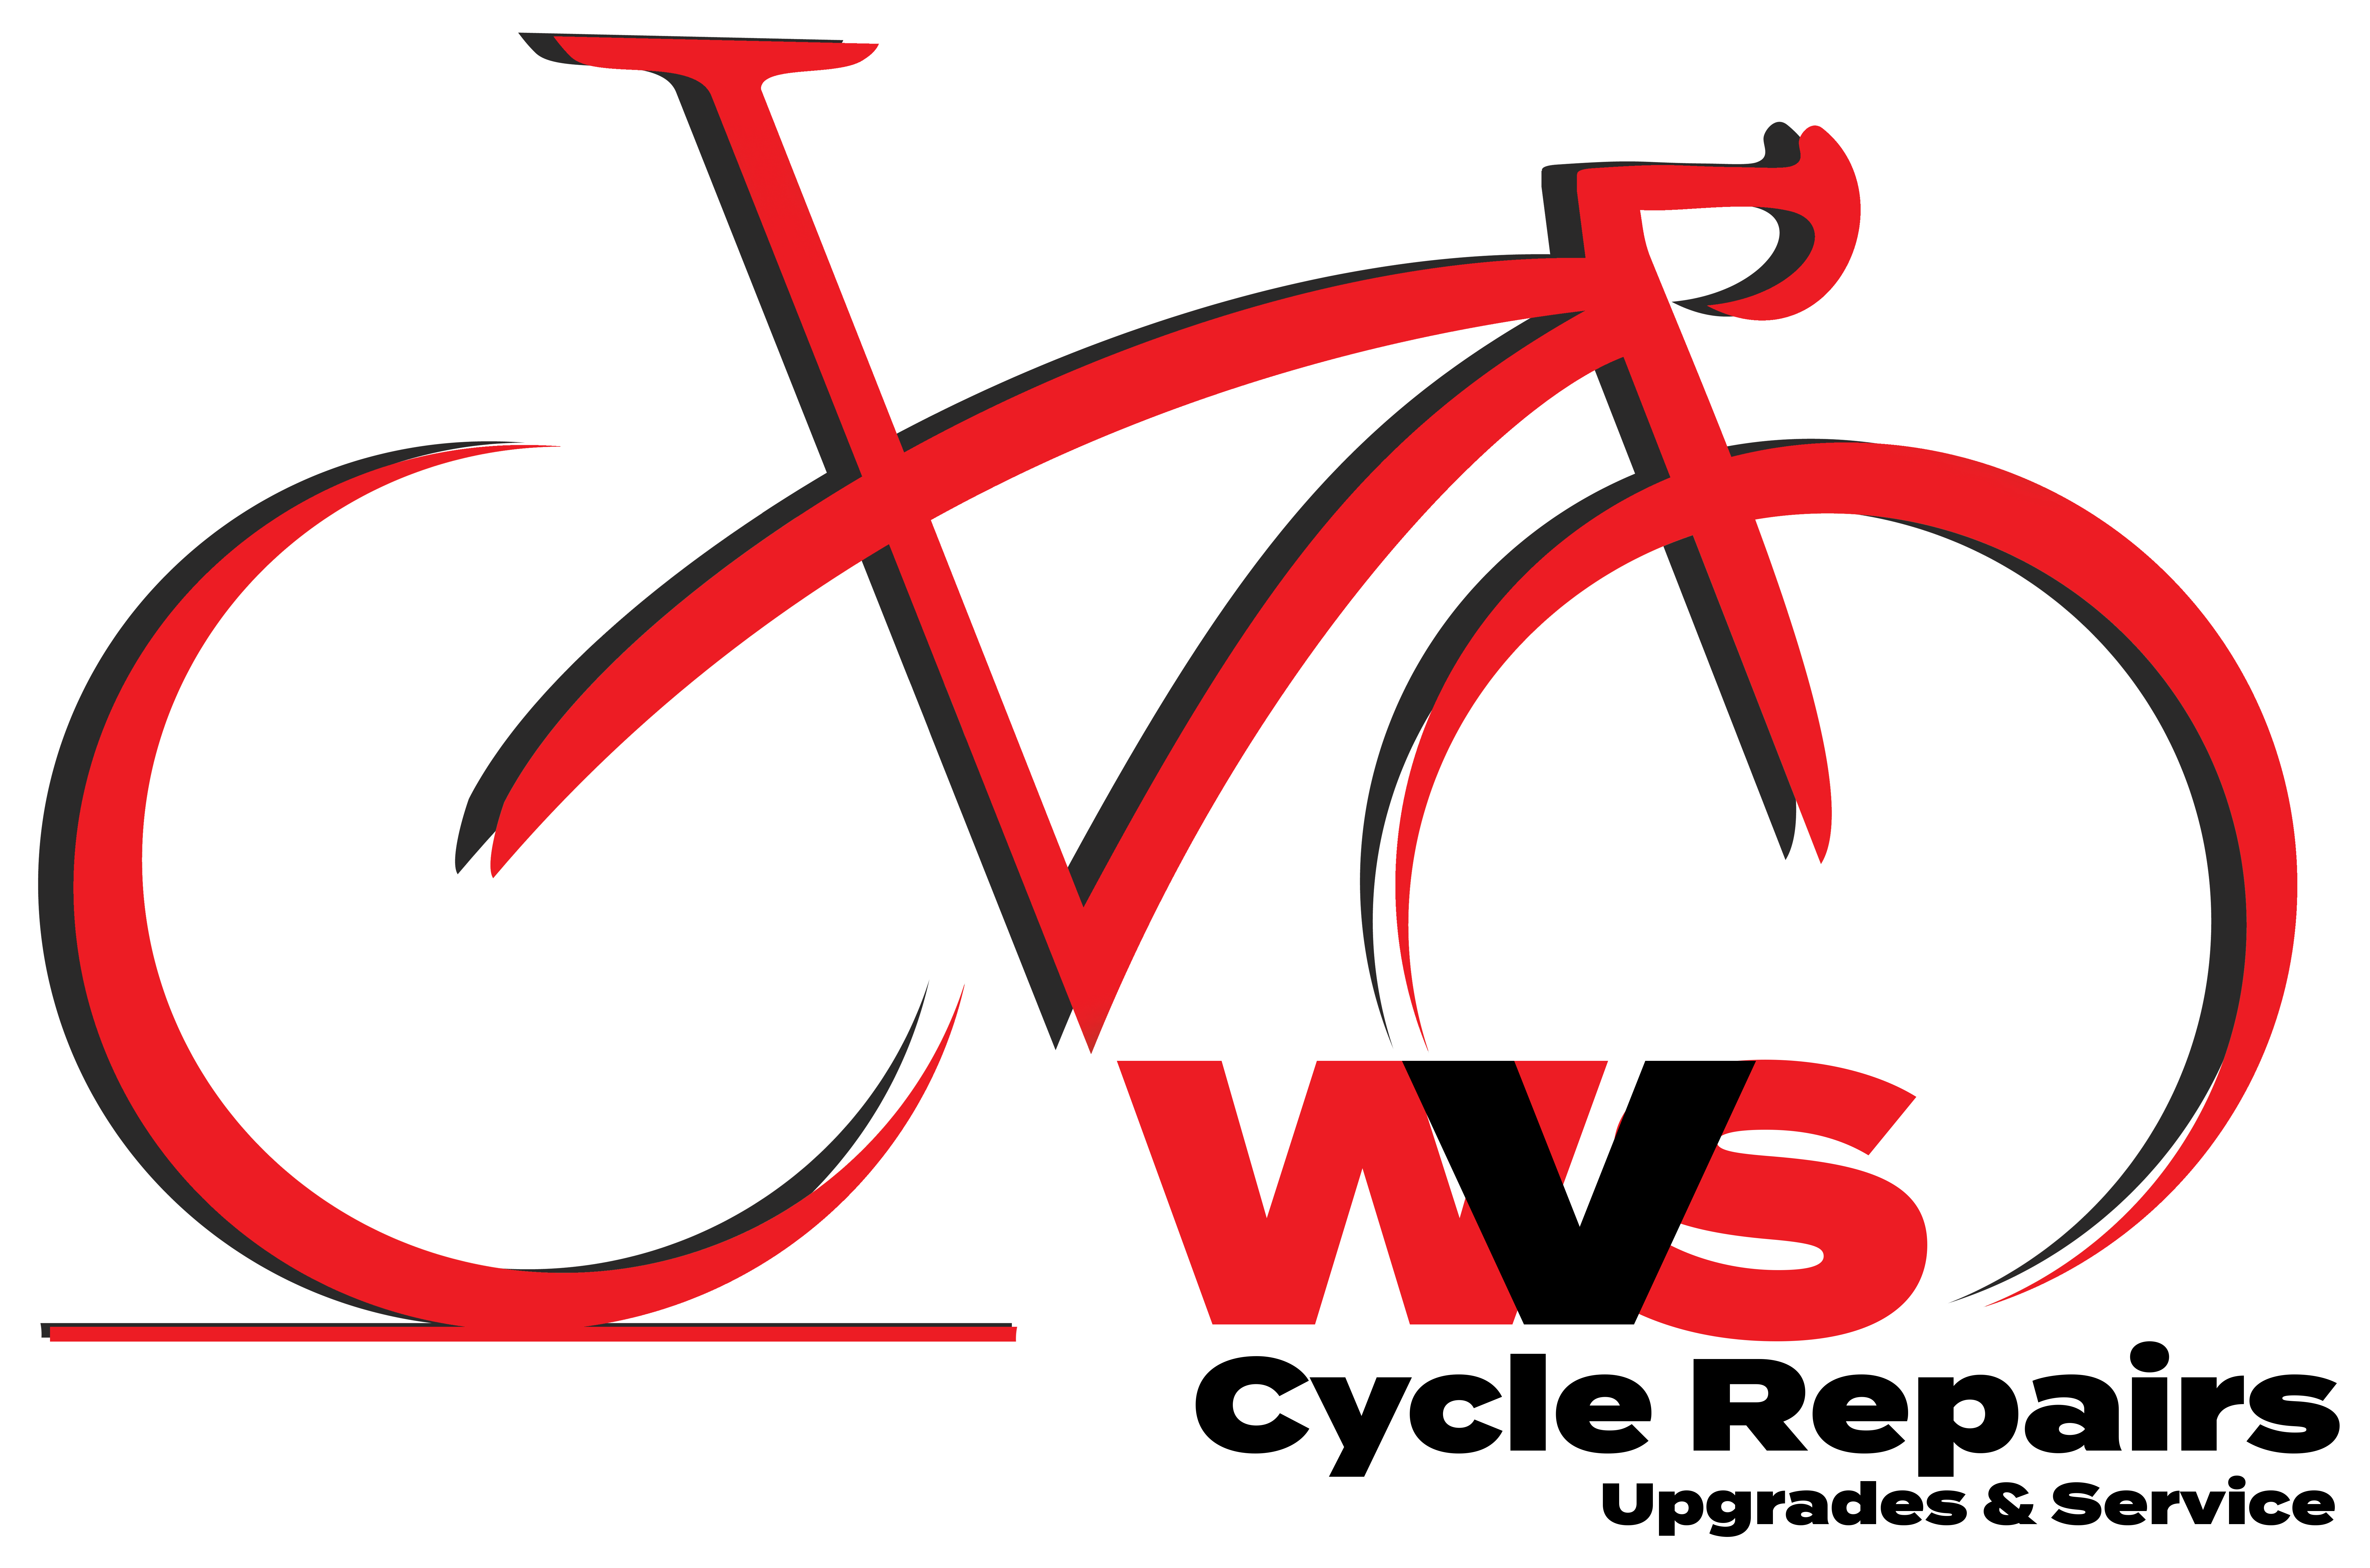 Bicycle repairs and bicycle service in Whitchurch, Wrexham and surrounding areas